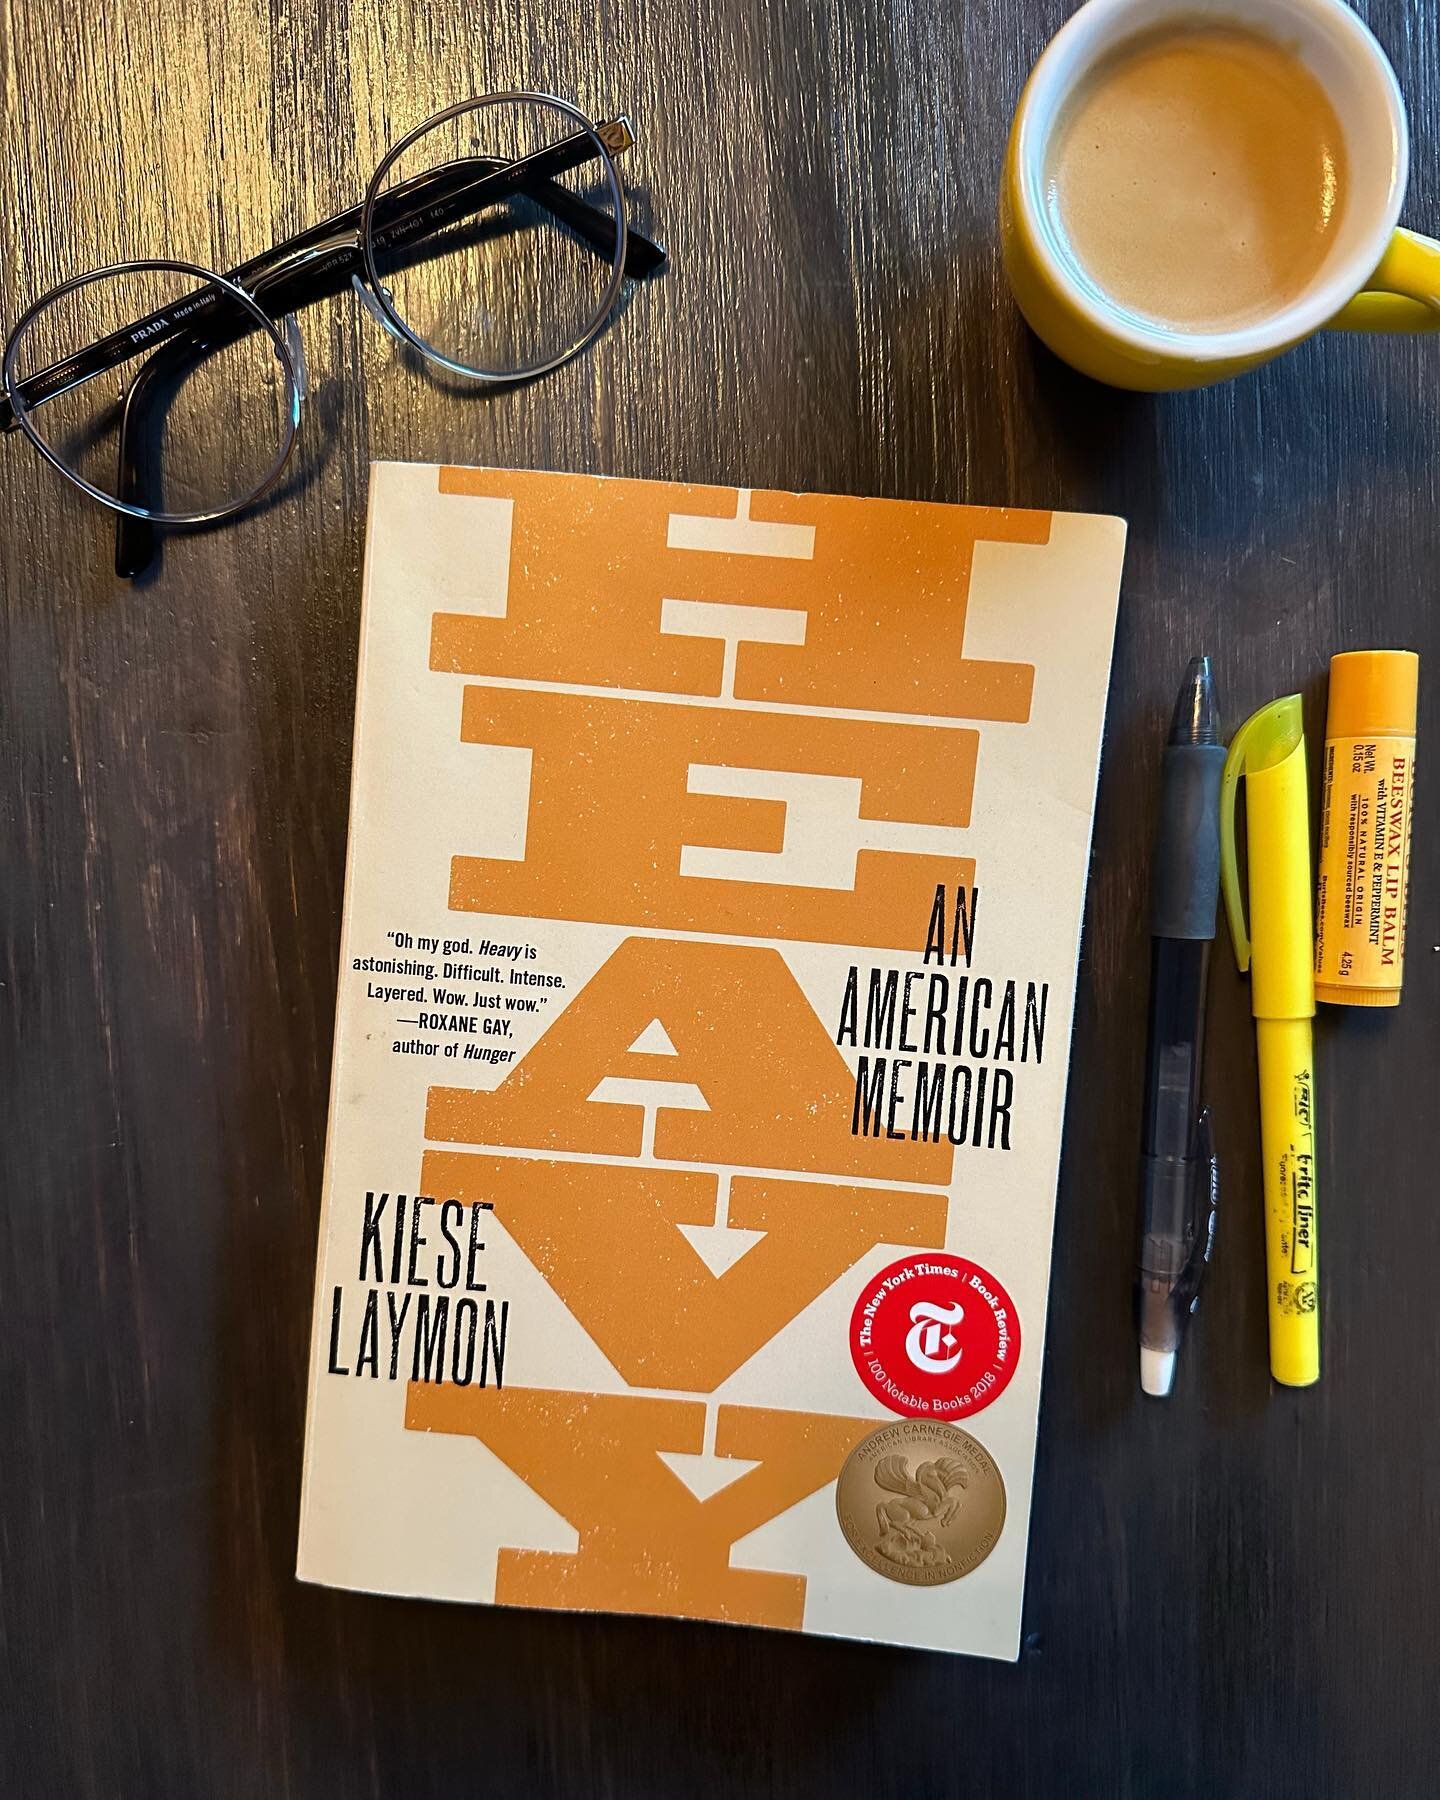 Heavy: An American Memoir by Kiese Laymon &mdash; this memoir is extraordinary. Part confessional, part societal critique, wholly masterful writing. I have nothing else to say about this book other than it&rsquo;s a work of genius. It doesn&rsquo;t m